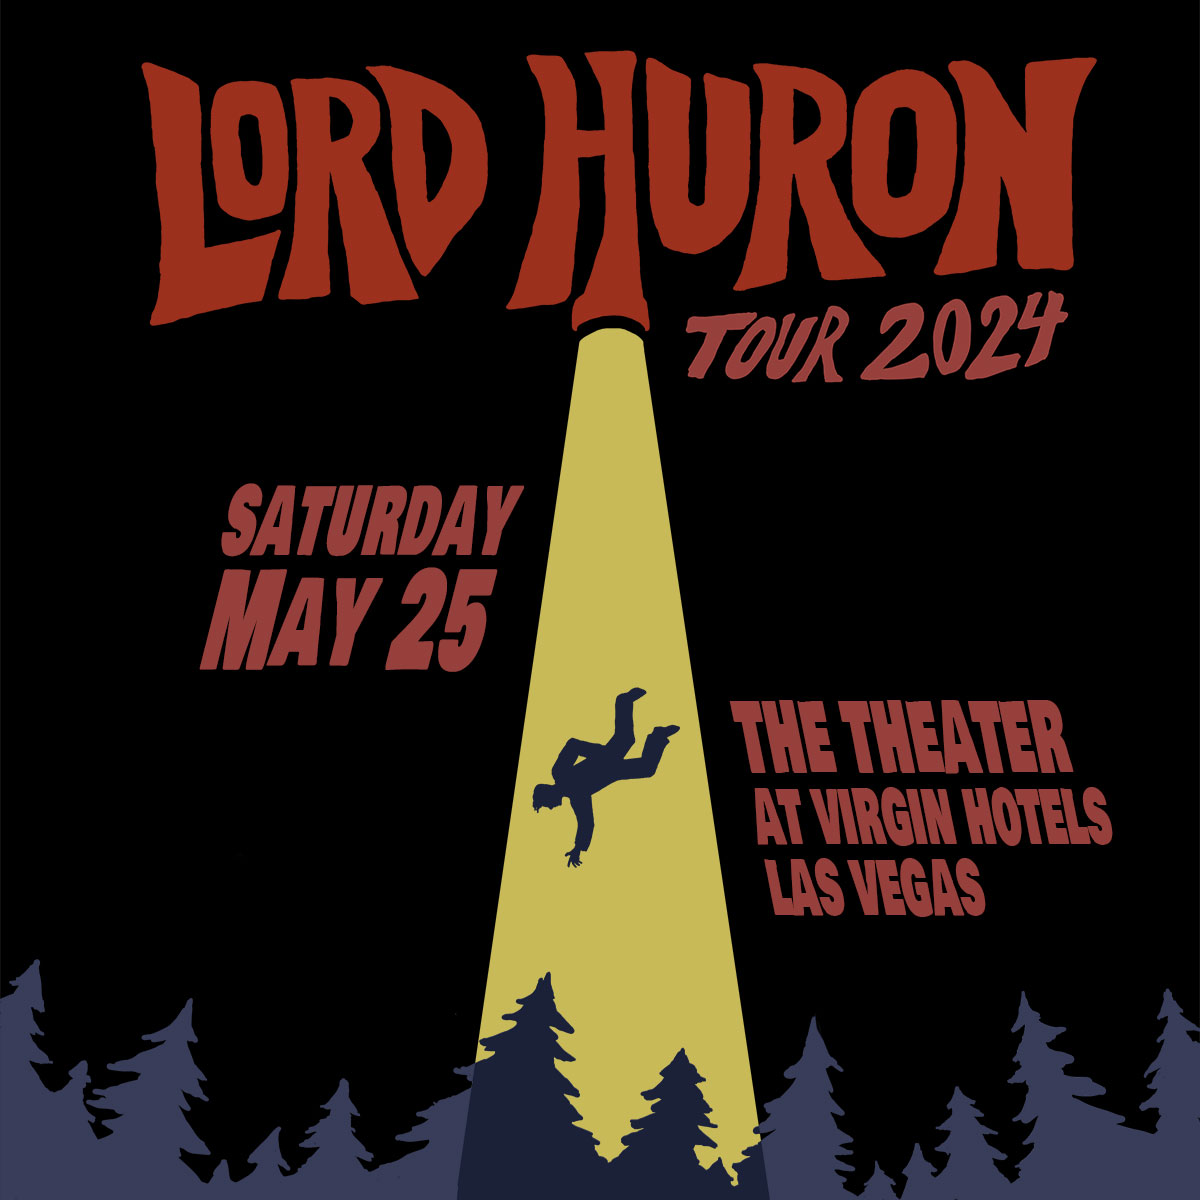 LORD HURONThe Theater at Virgin Hotels Las Vegas